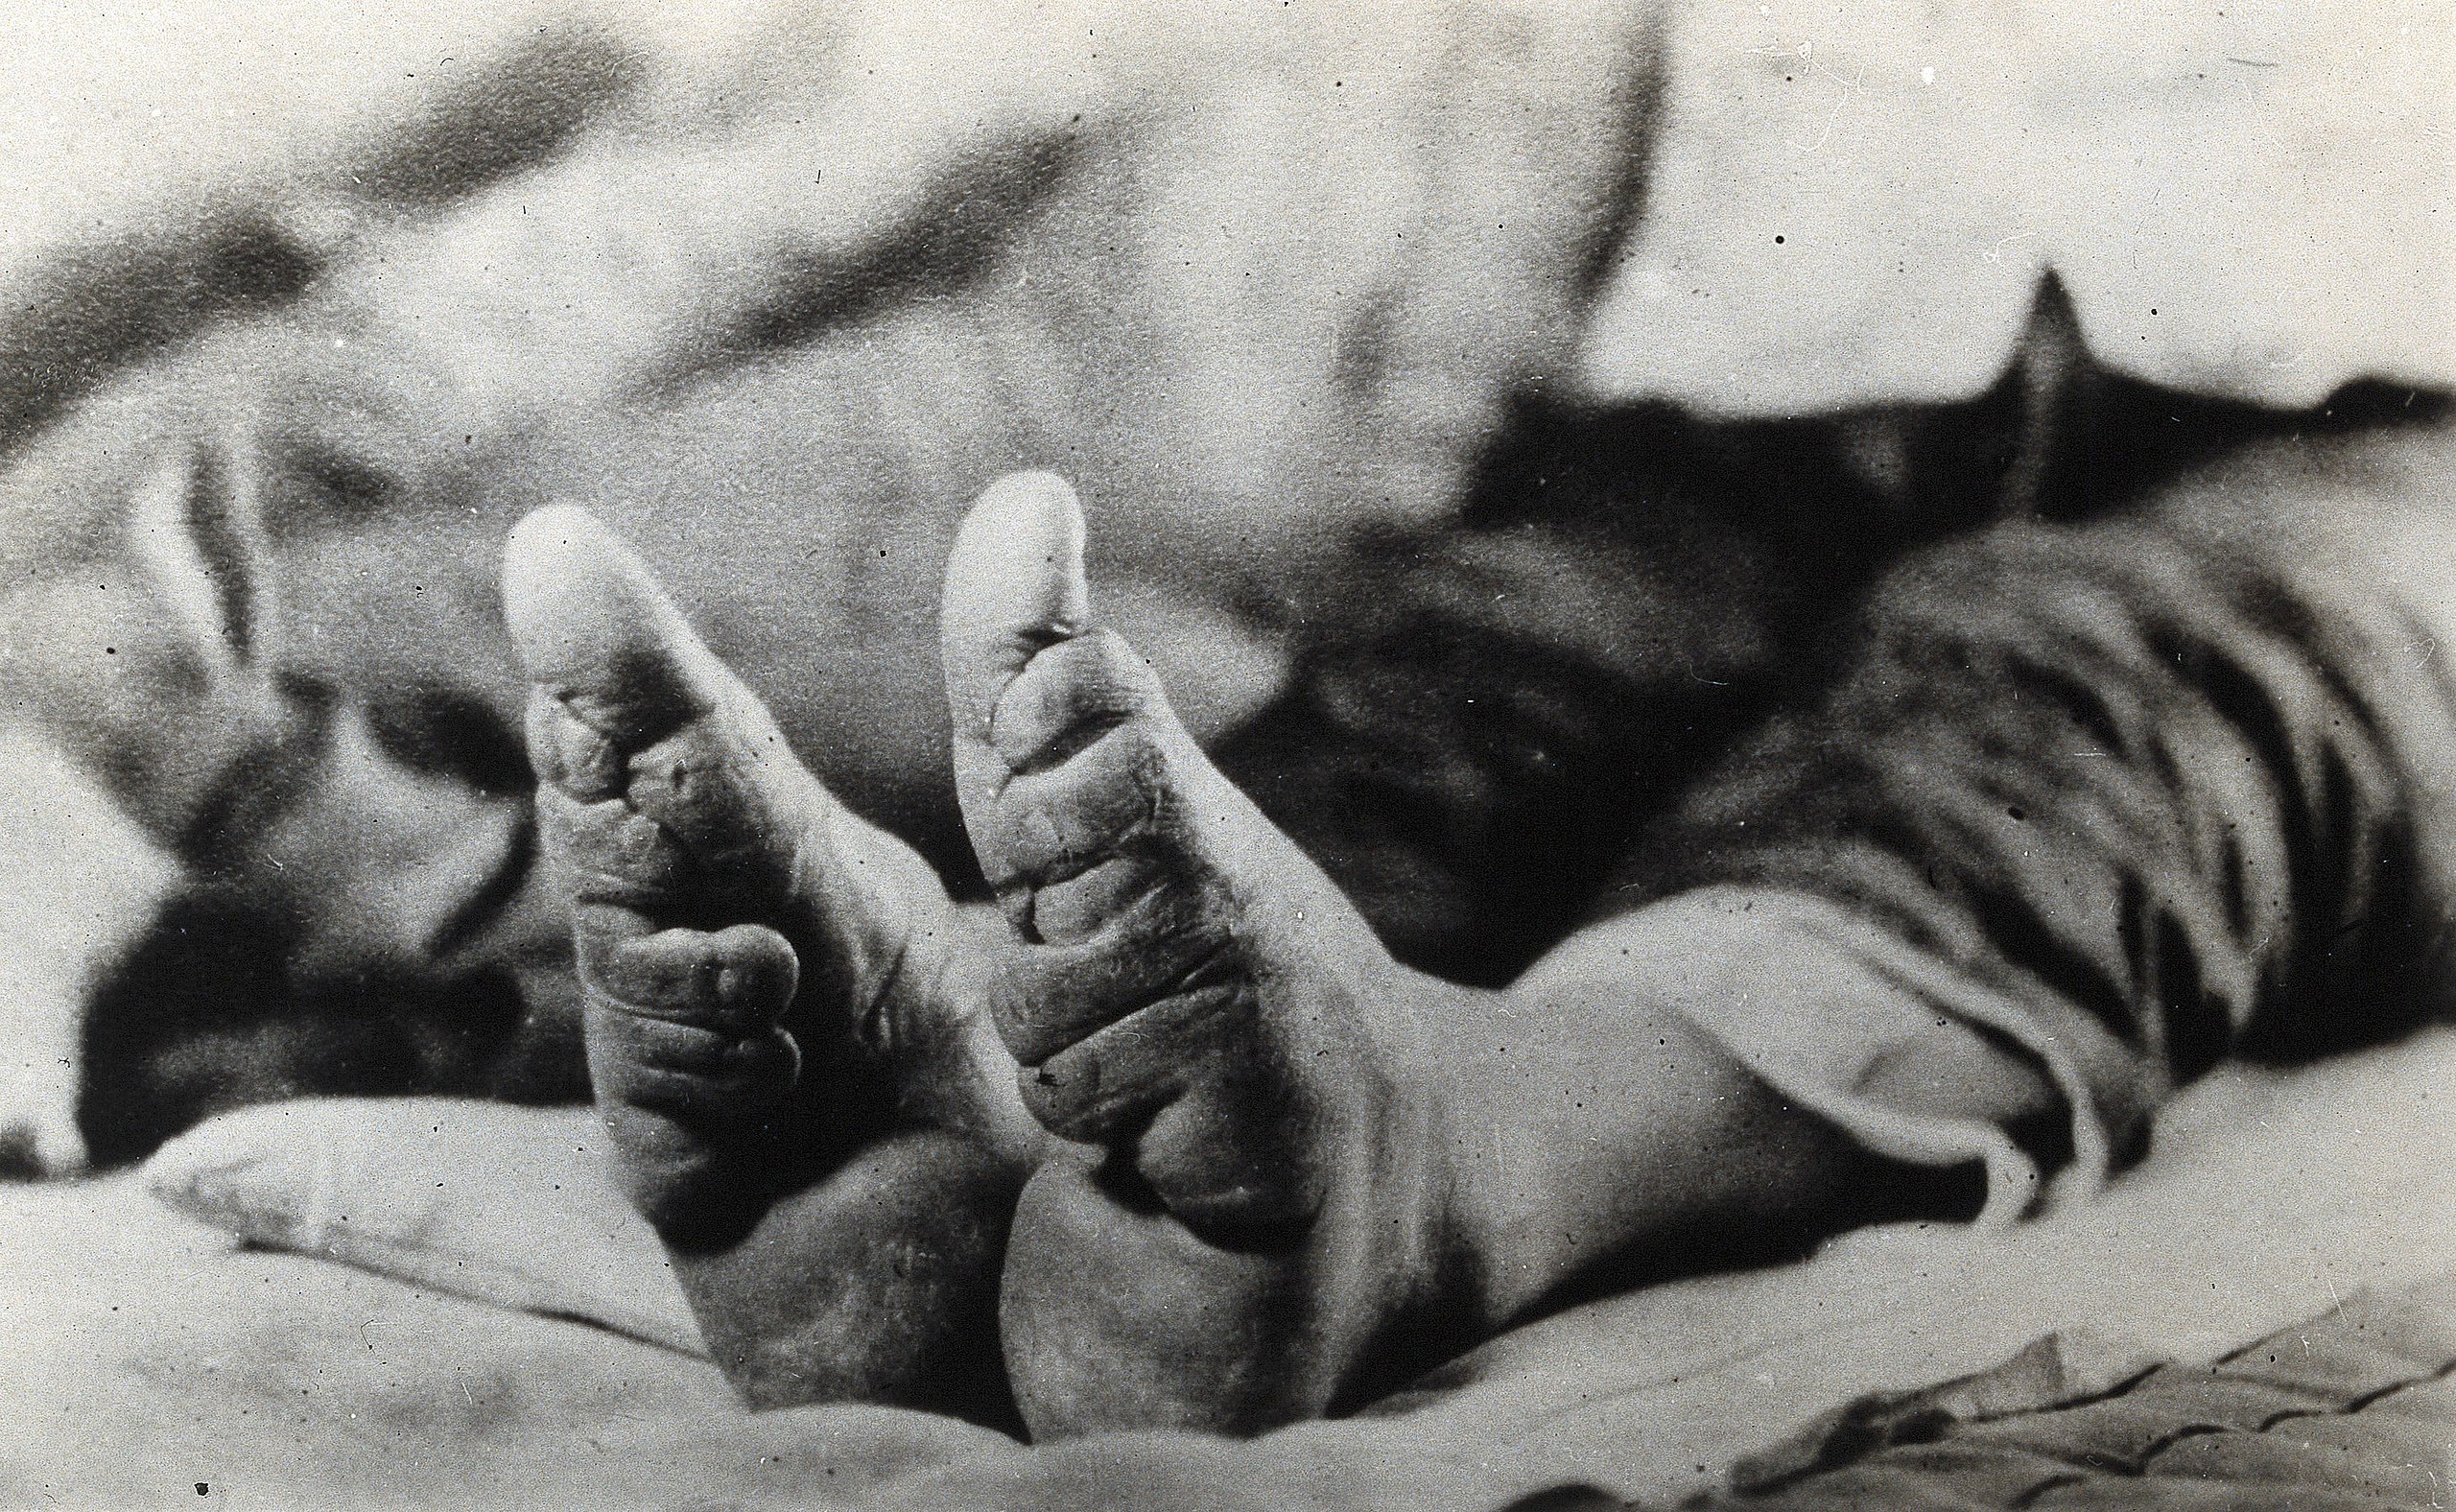 File:Feet of a Chinese woman, showing the effect of foot-binding